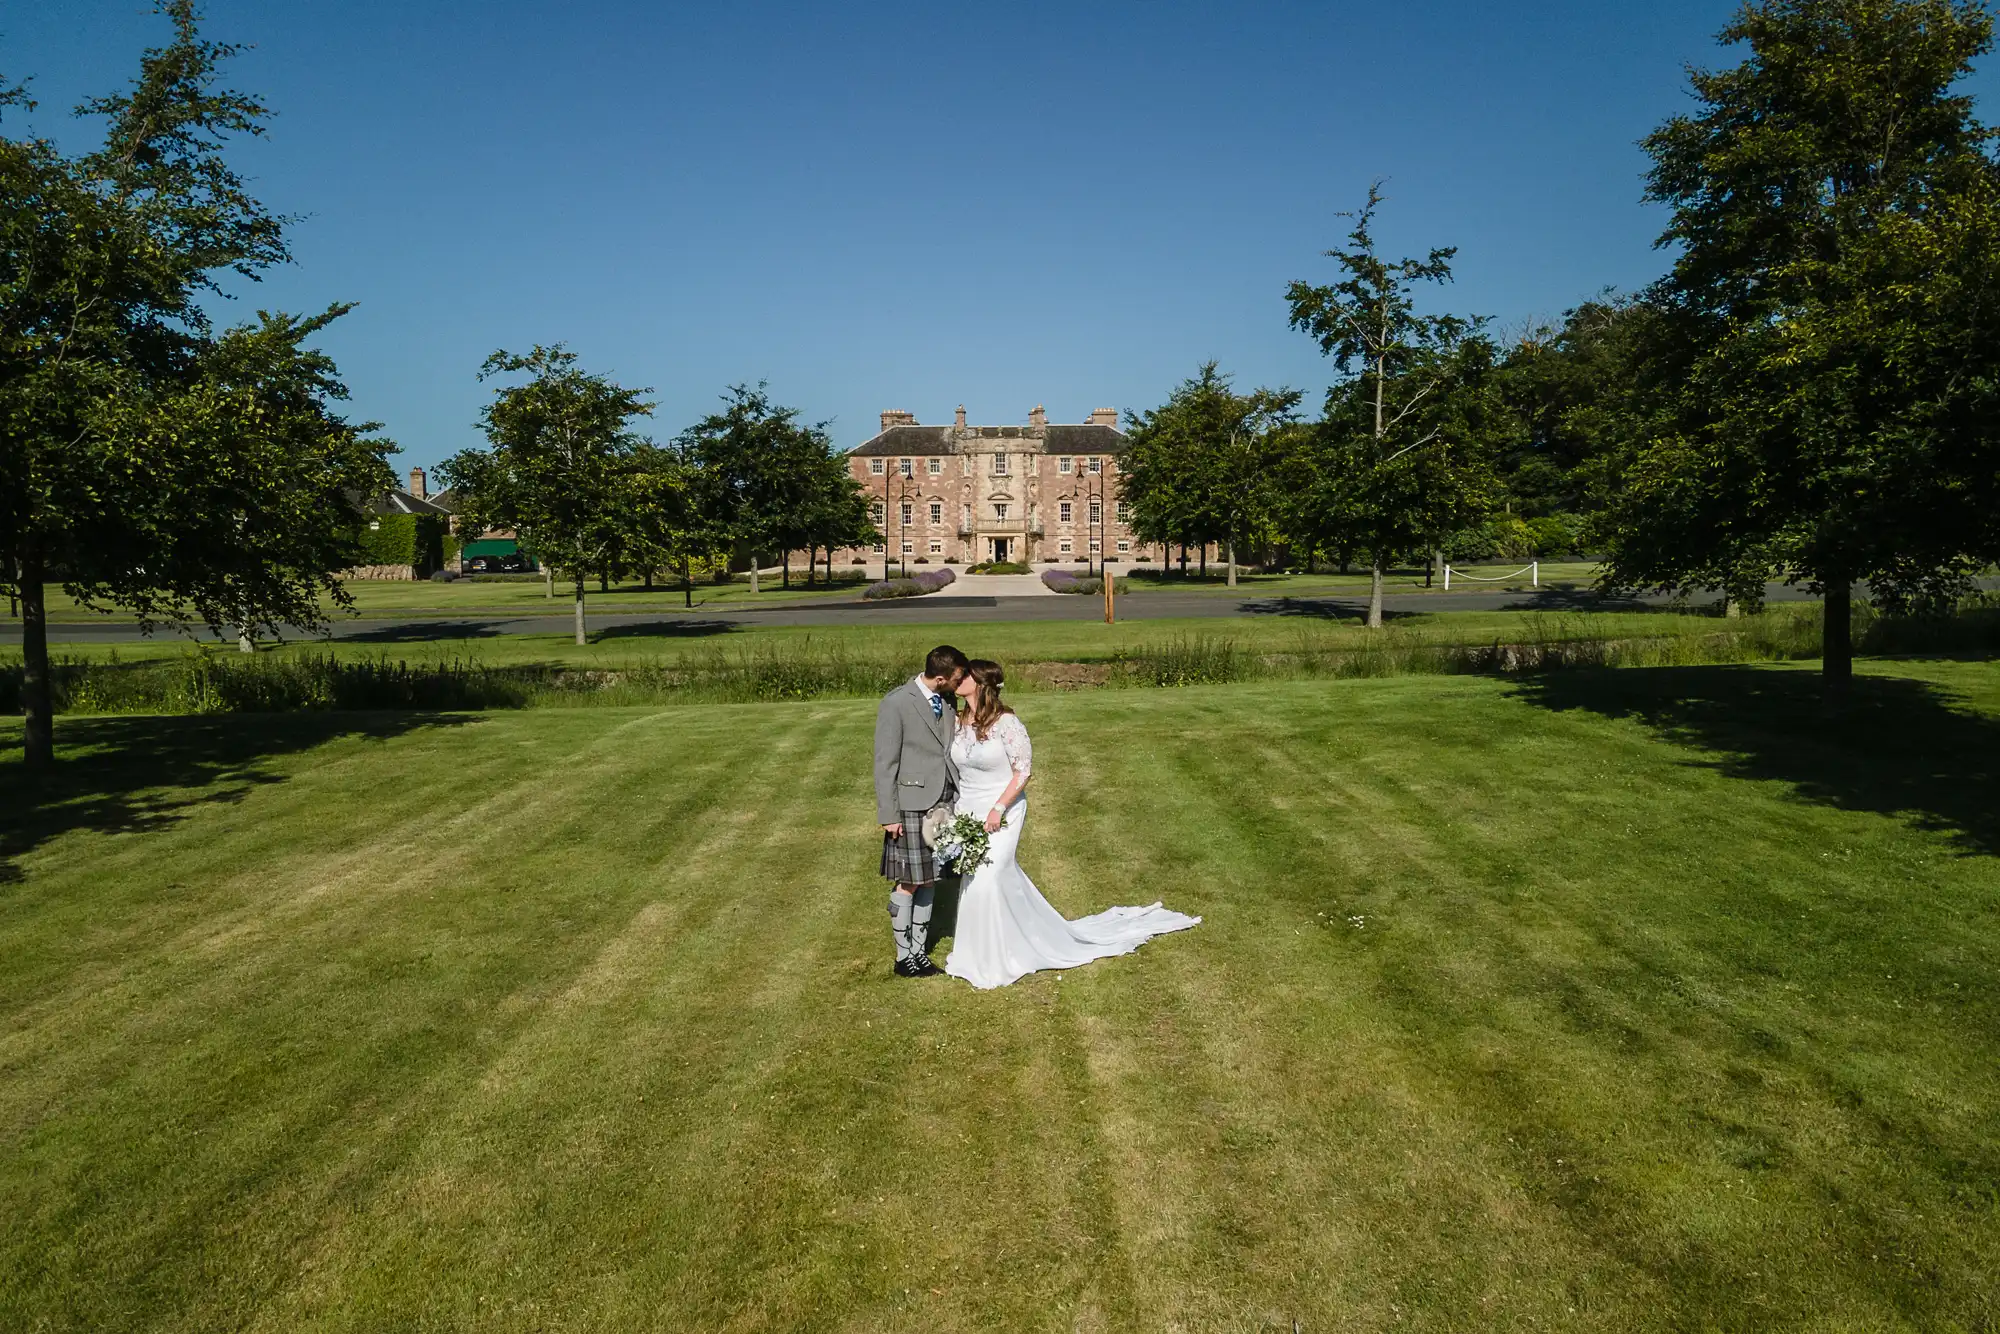 A bride and groom stand holding hands in a grassy field, with a grand estate visible in the background under a clear blue sky.